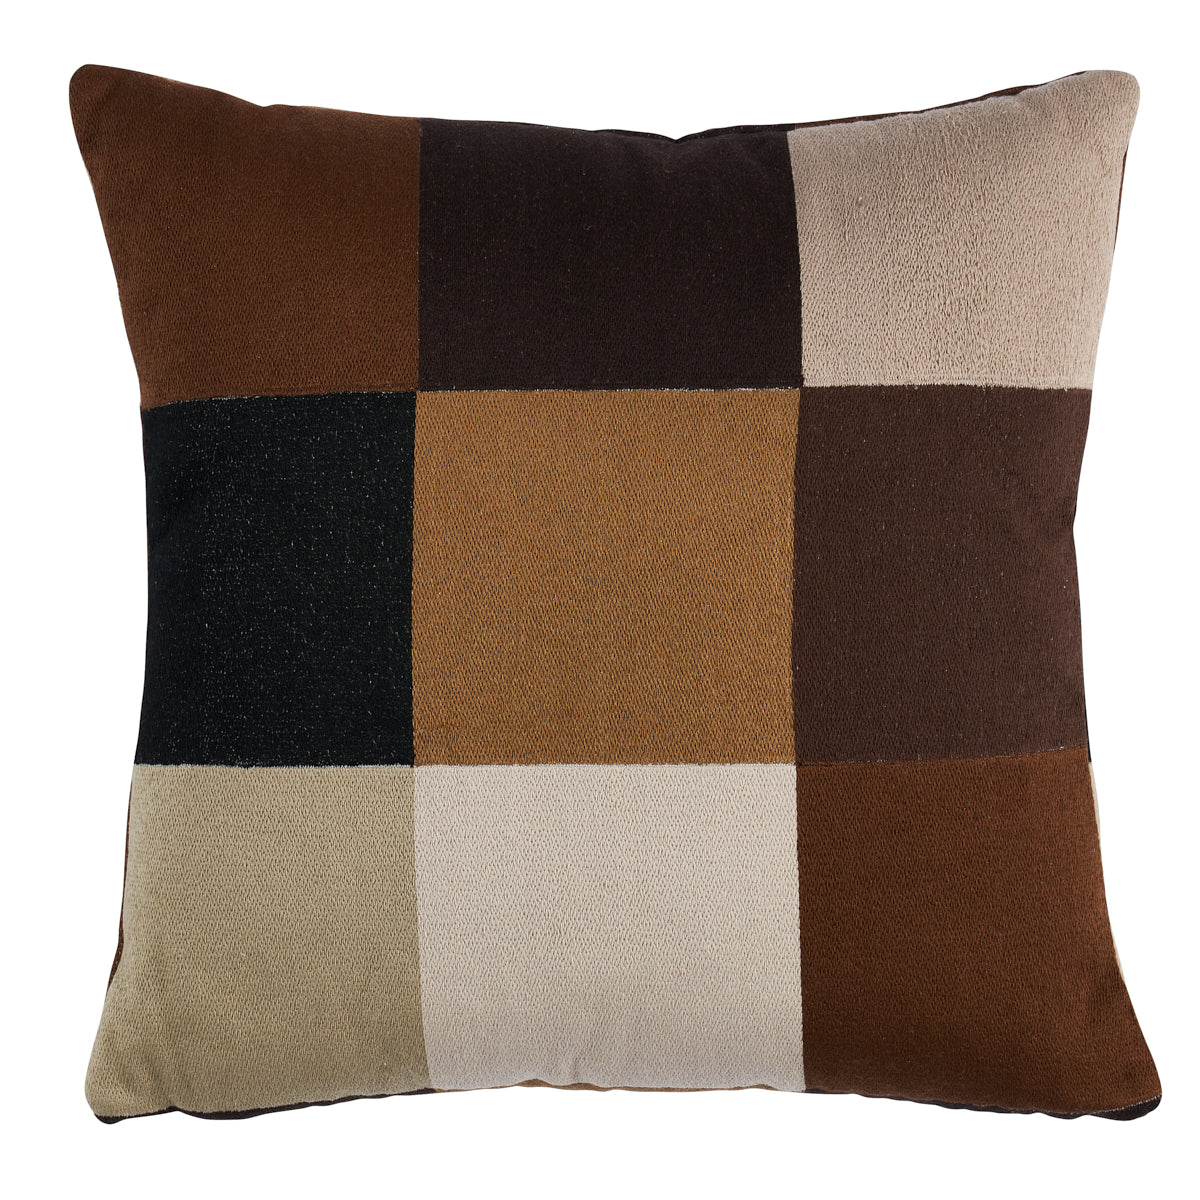 Purchase So8183339 | Embroidered Tile Pillow, Strong Neutral - Schumacher Pillows